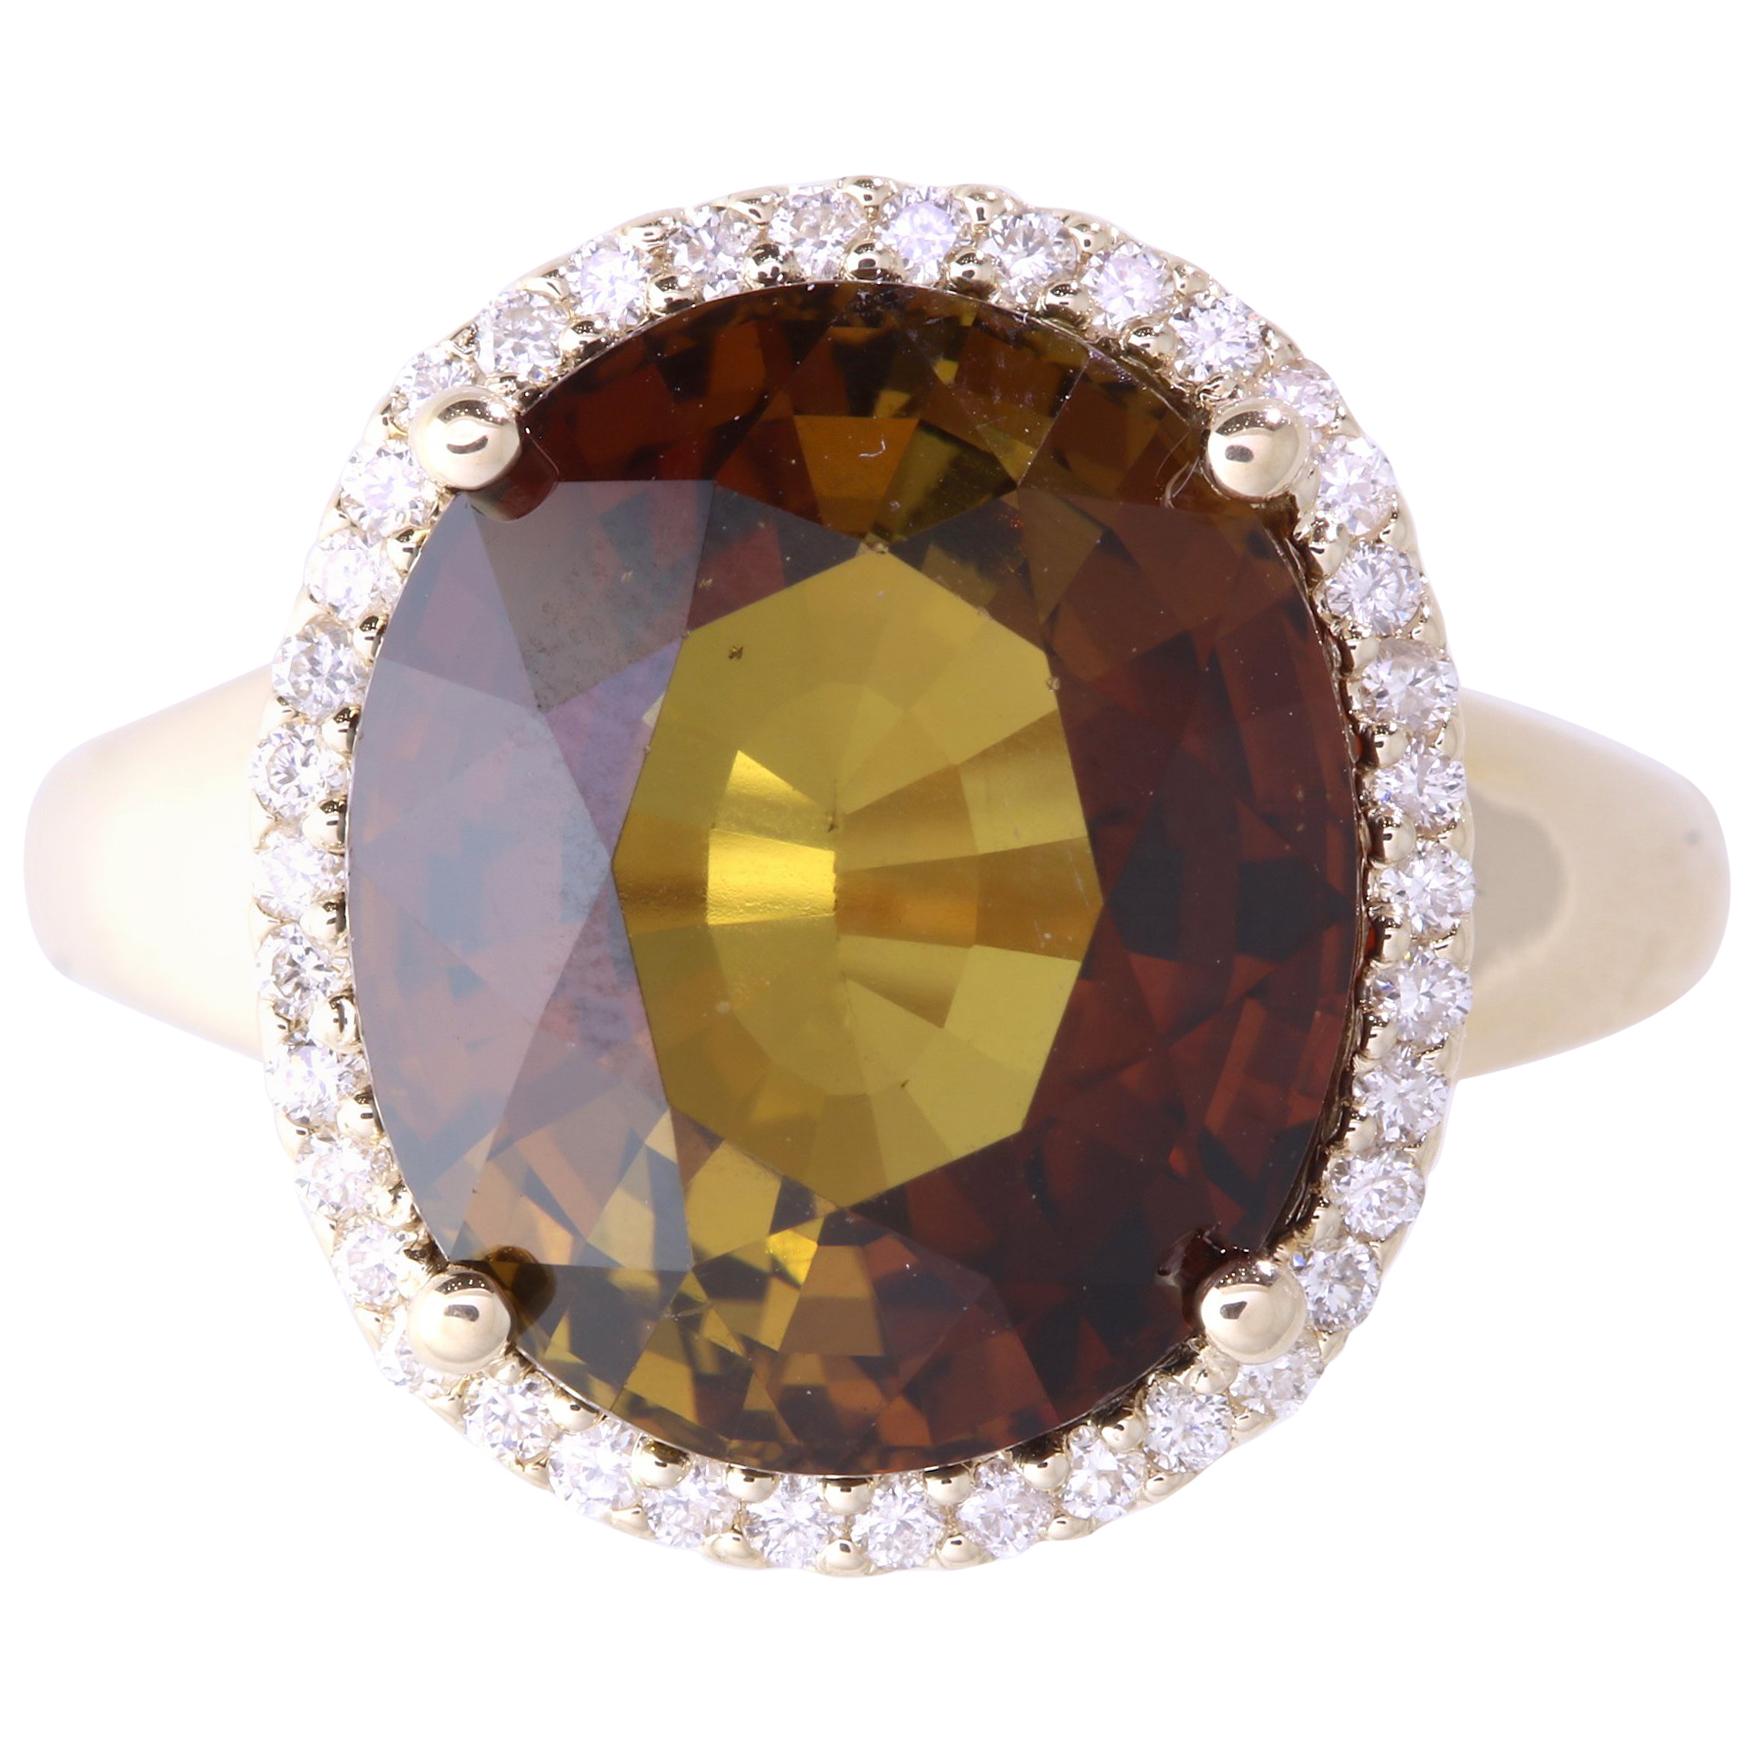 Material: 14k Yellow Gold 
Center Stone Details: 9.44 Carat Oval Tourmaline 
Mounting Diamond Details: 38 Brilliant Round White Diamonds Approximately 0.28 Carats - Clarity: SI / Color: H-I
Ring Size: Size 6.75. Alberto offers complimentary sizing